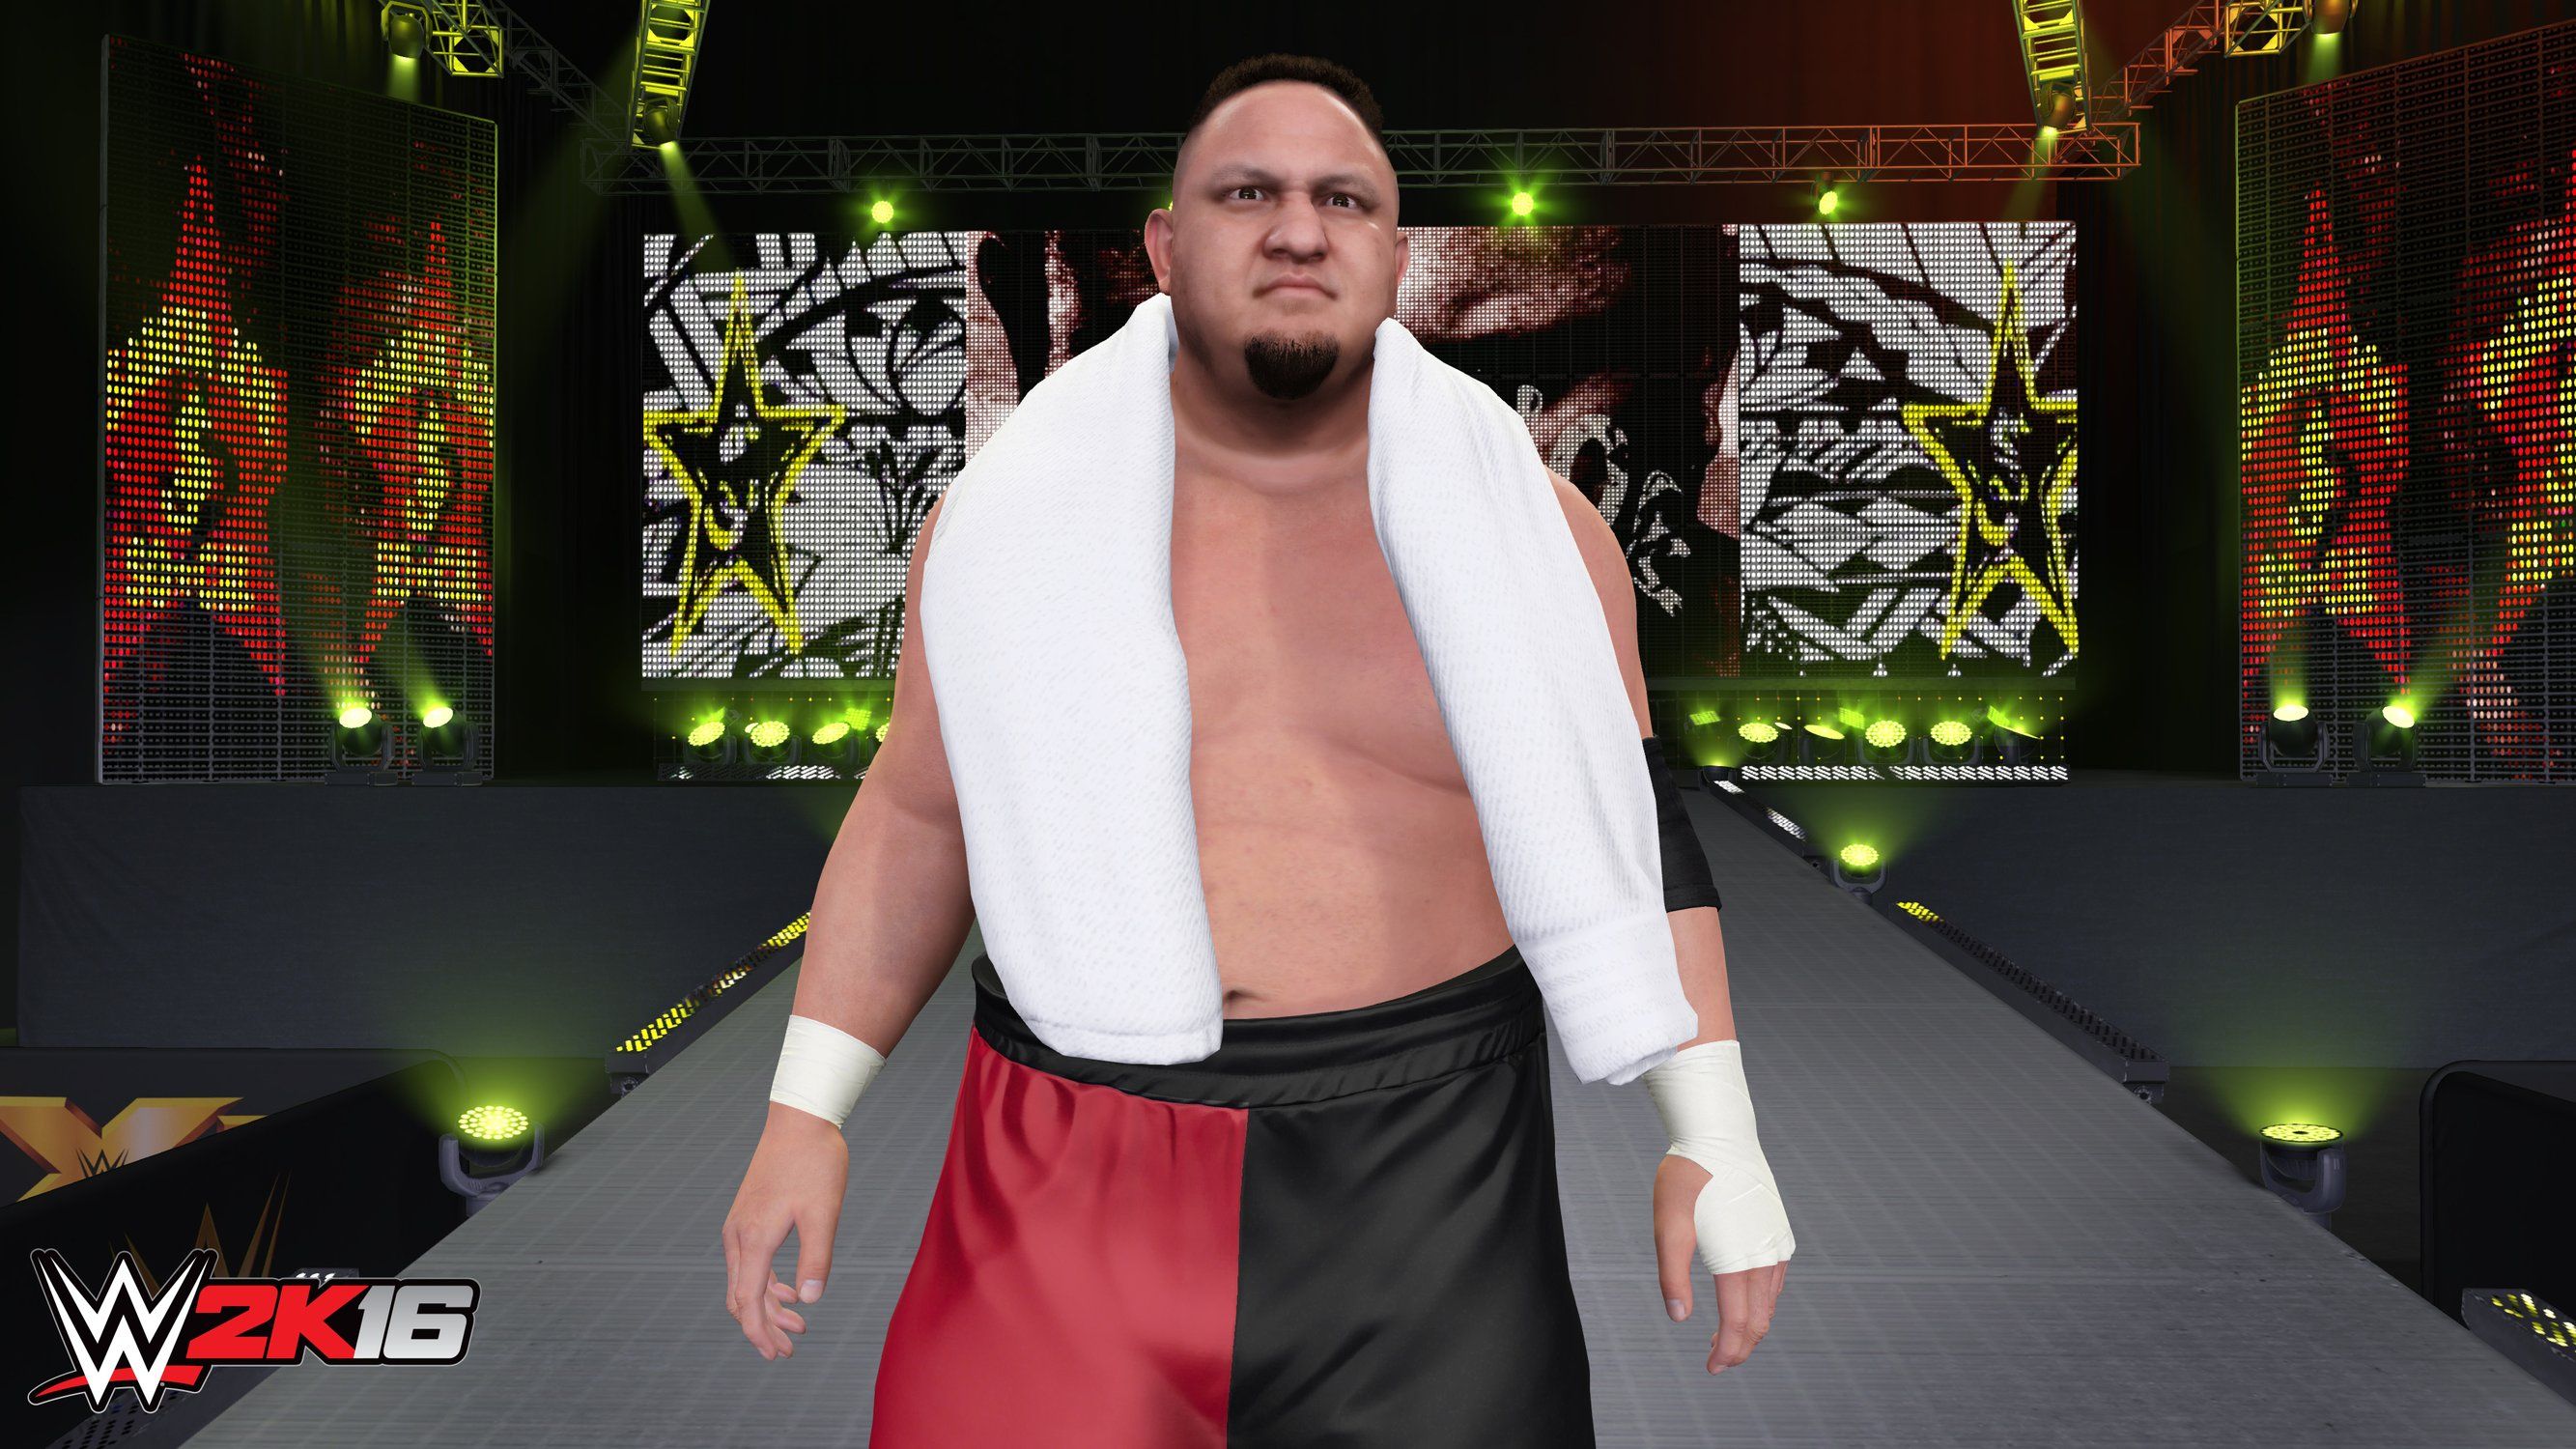 2K16's new Future Stars DLC breaks the game on PS4 and Xbox One